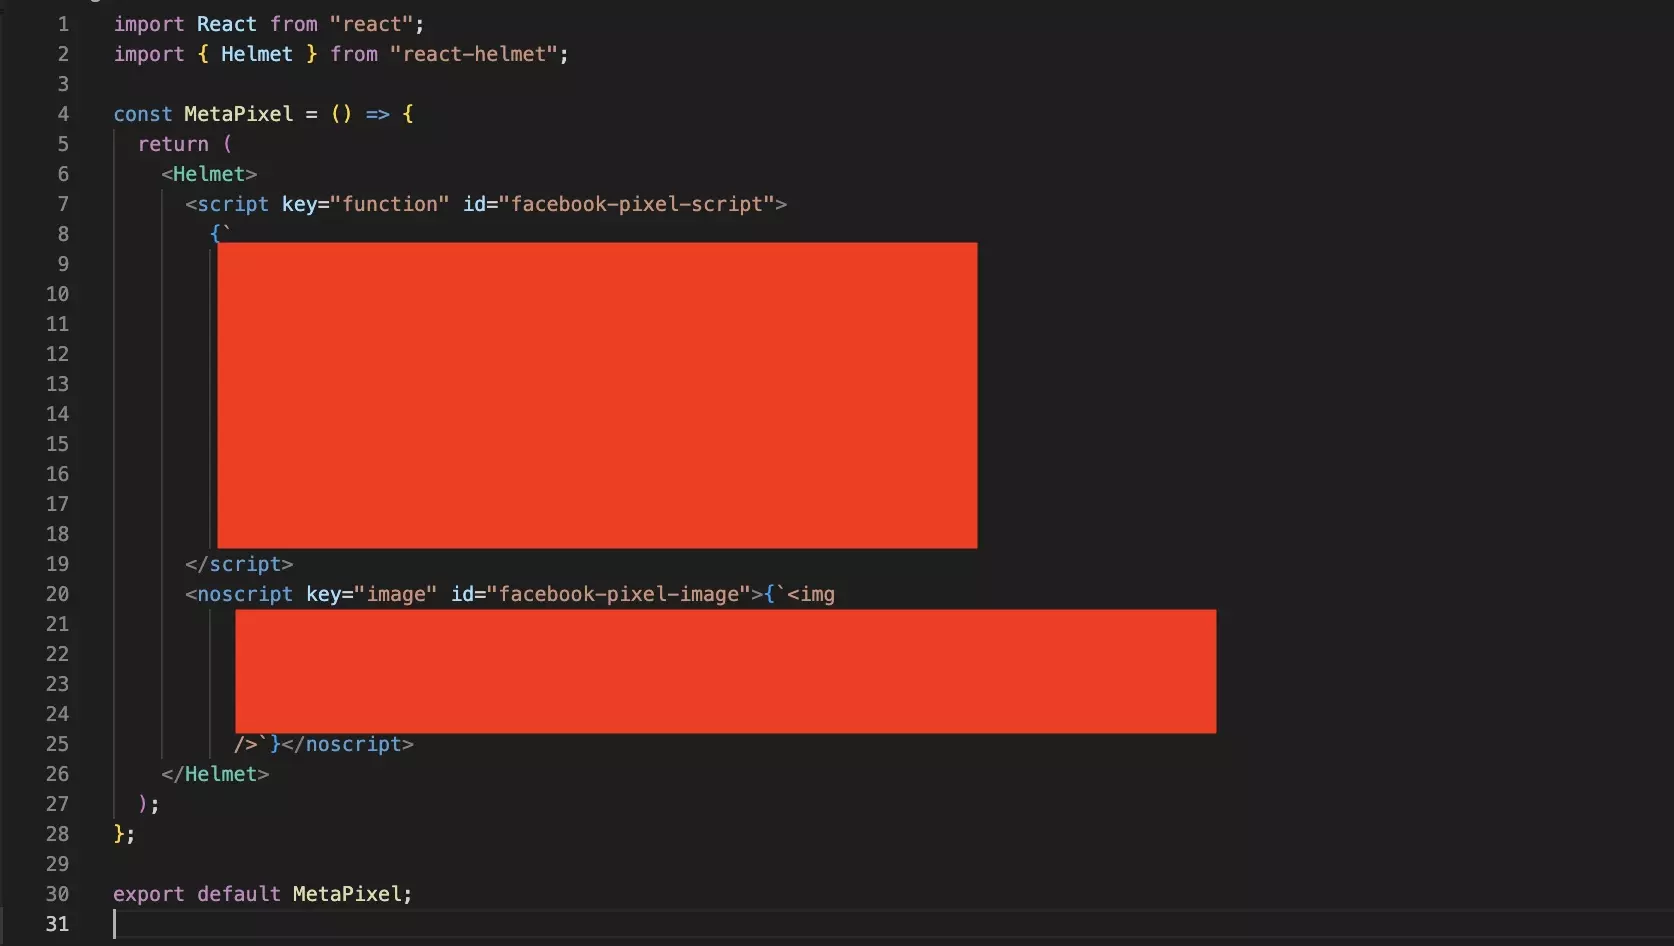 A screenshot of VSCode showing the code required to integrate the Facebook Pixel into a react or gatsbyjs website.